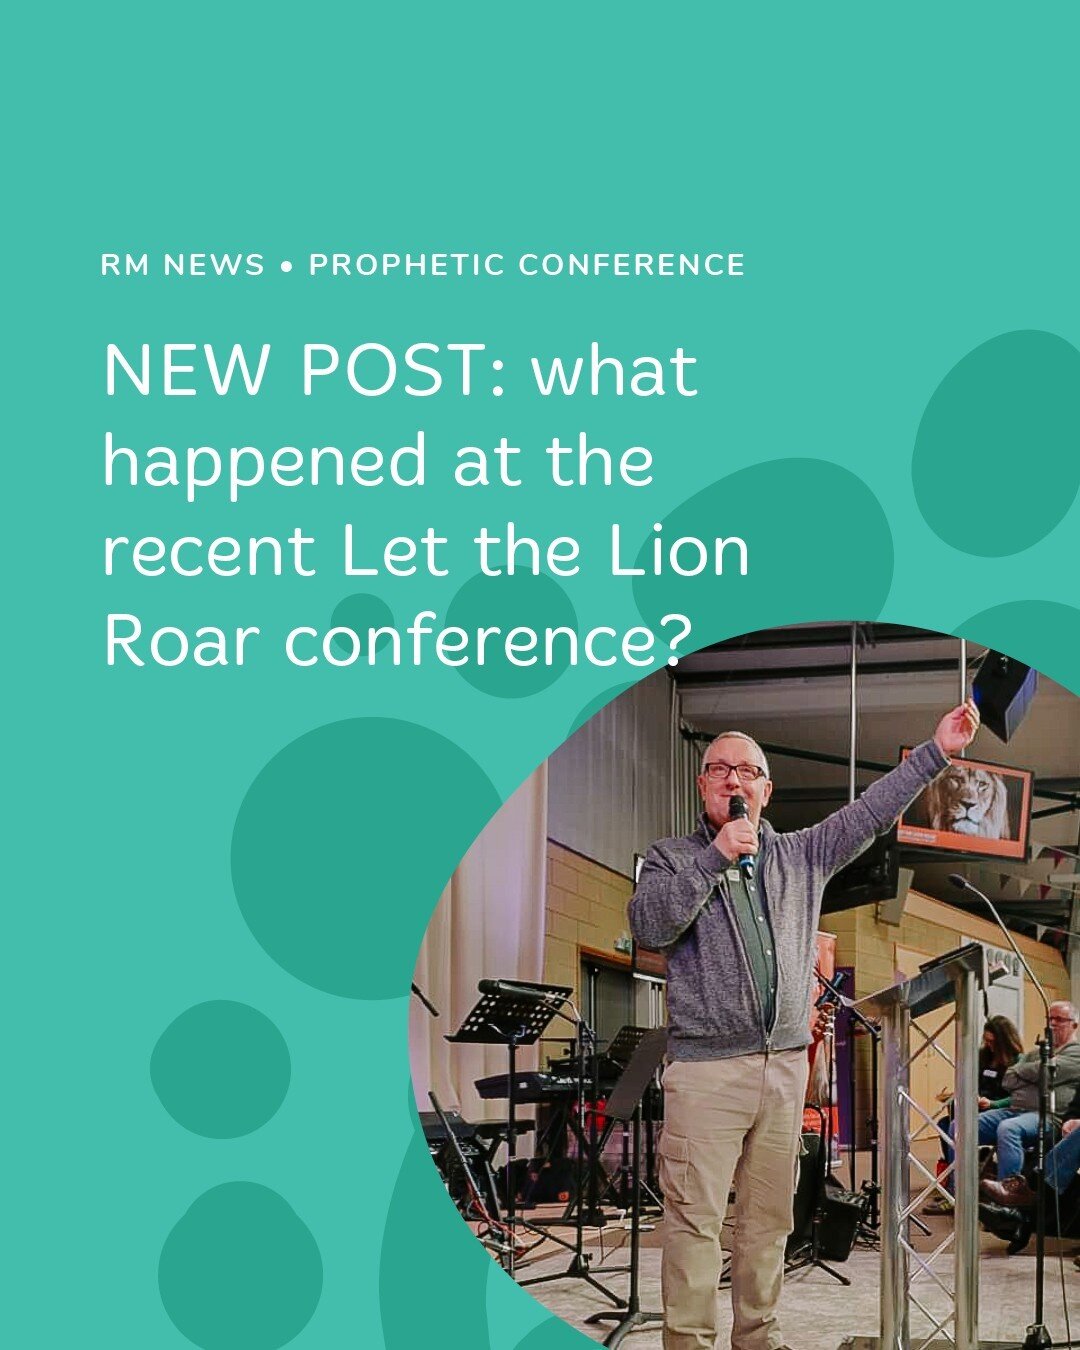 NEW POST: &quot;The conference finished at 9pm which, after an early start of 9am, tested many people&rsquo;s stamina and perseverance! Yet all went home with hearts full of all that the Lord had done and promises to do.&quot;⁠
⁠
Read more at the lin